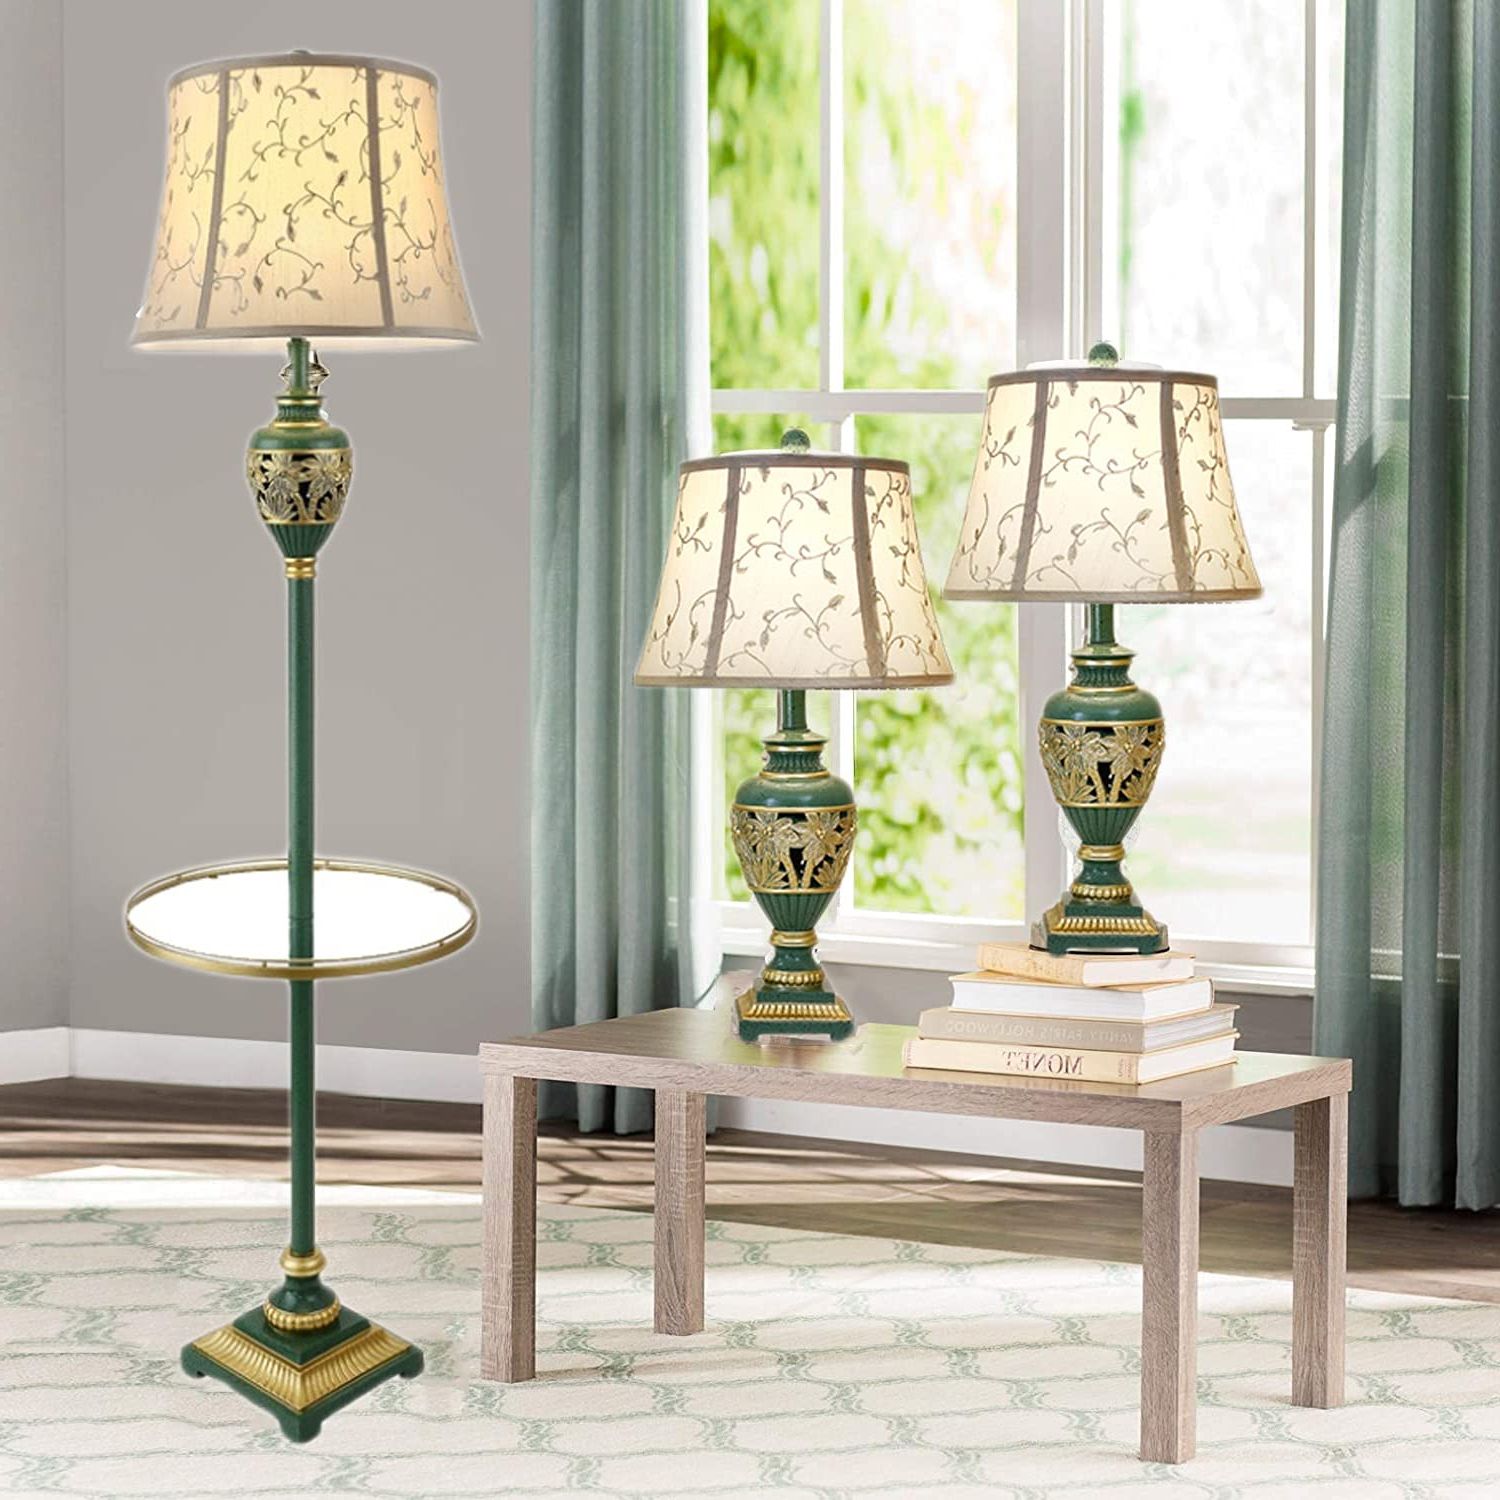 3 Piece Setstanding Lamps Intended For Famous Amazon: 3 Set Of Lamp With Embroidered Fabric Lamp Shade, 2 Table Lamps  + 1 Floor Lamp Matching Set, 3 Pieces Modern Lamps Set Standing Light :  Tools & Home Improvement (View 1 of 15)